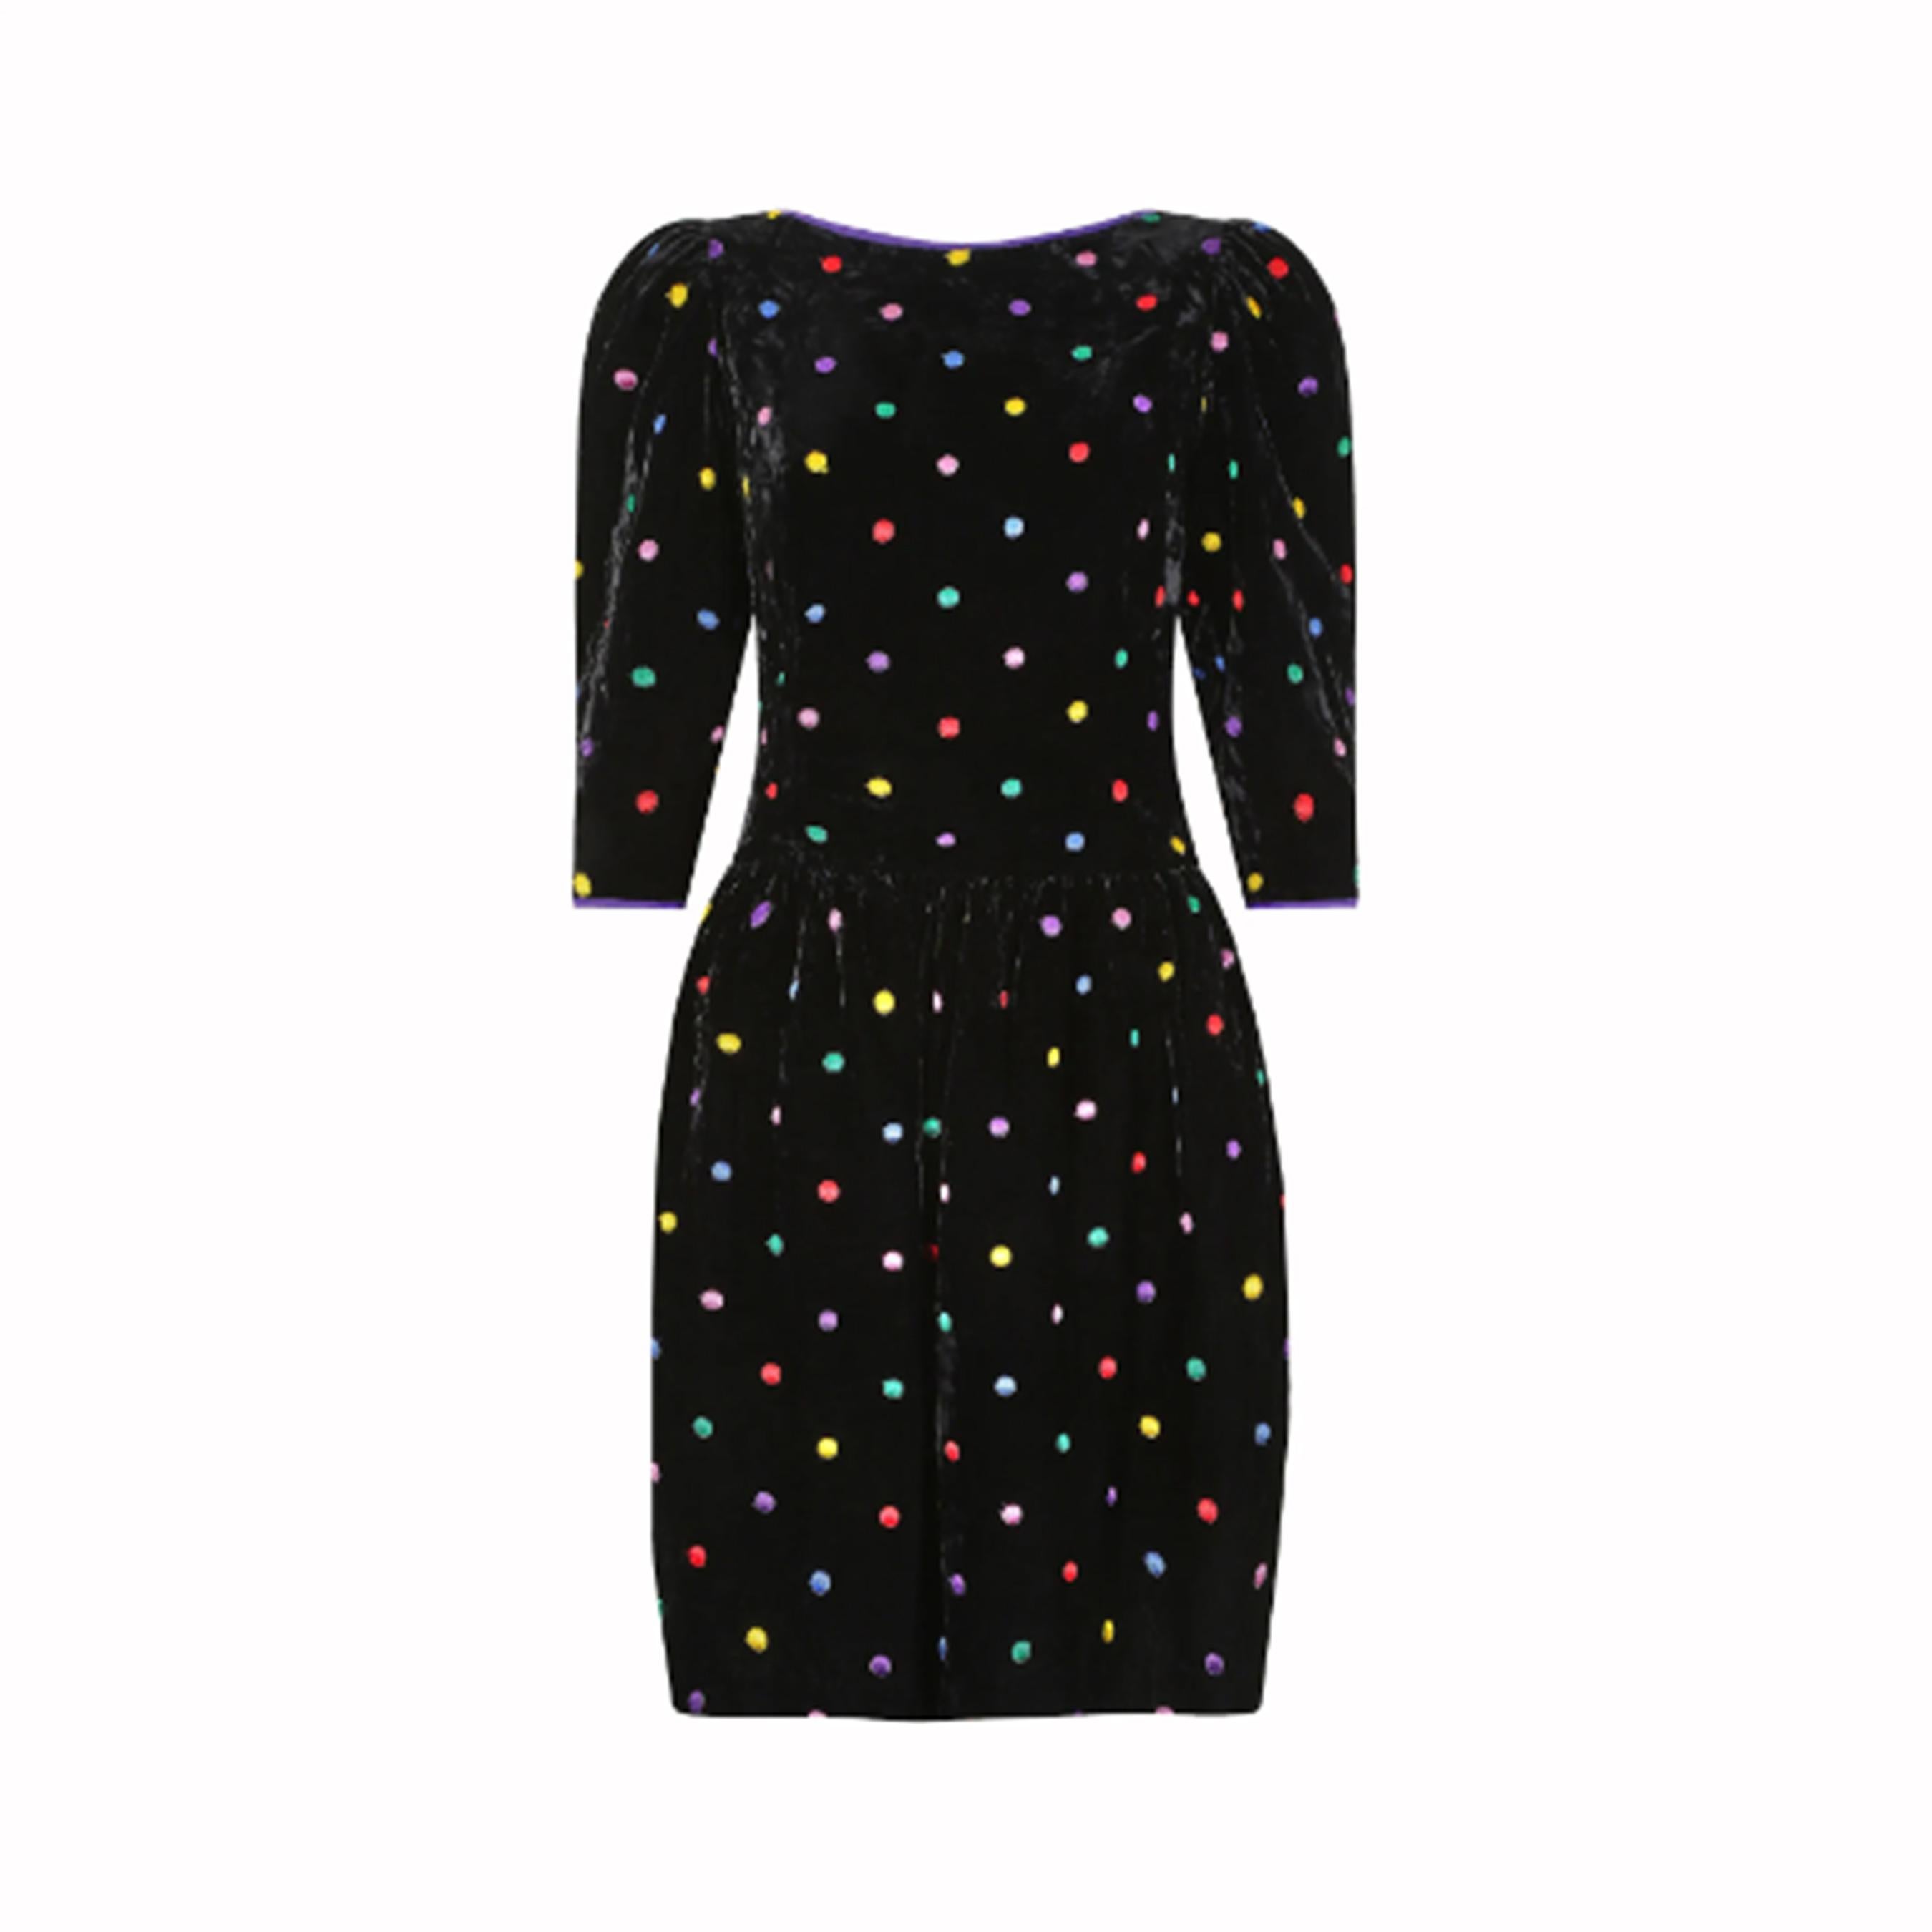 This late 1980s or early 1990s black velvet polka dot dress by Caroline Charles would make the perfect seasonal party piece! It features a wide boat neckline with purple silk contrast edge, and puff 3/4 length sleeves which add structure to the